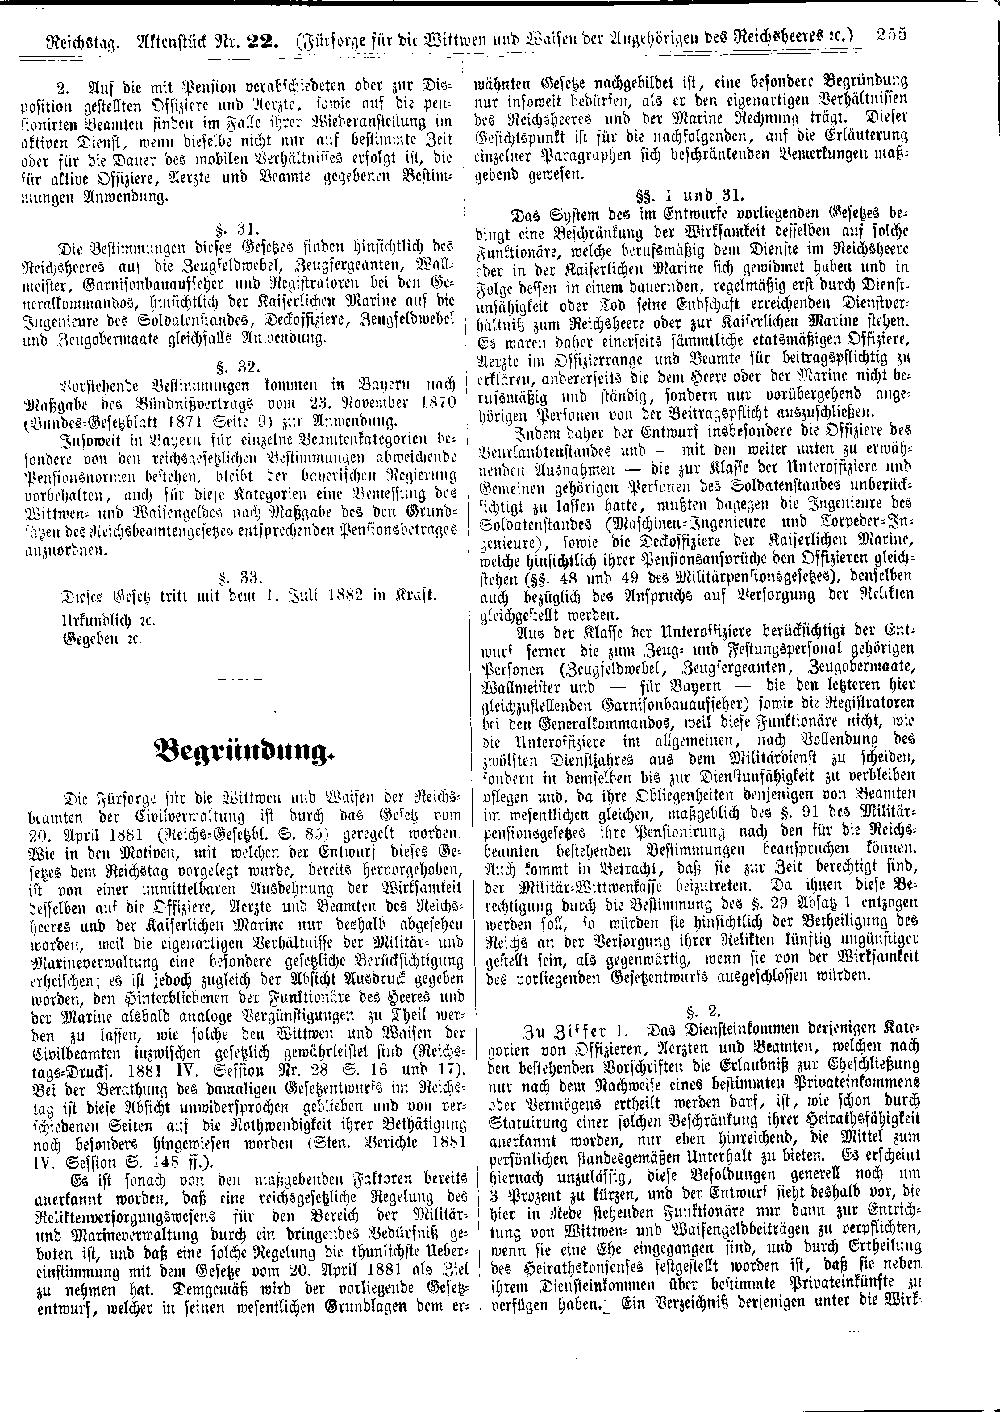 Scan of page 255